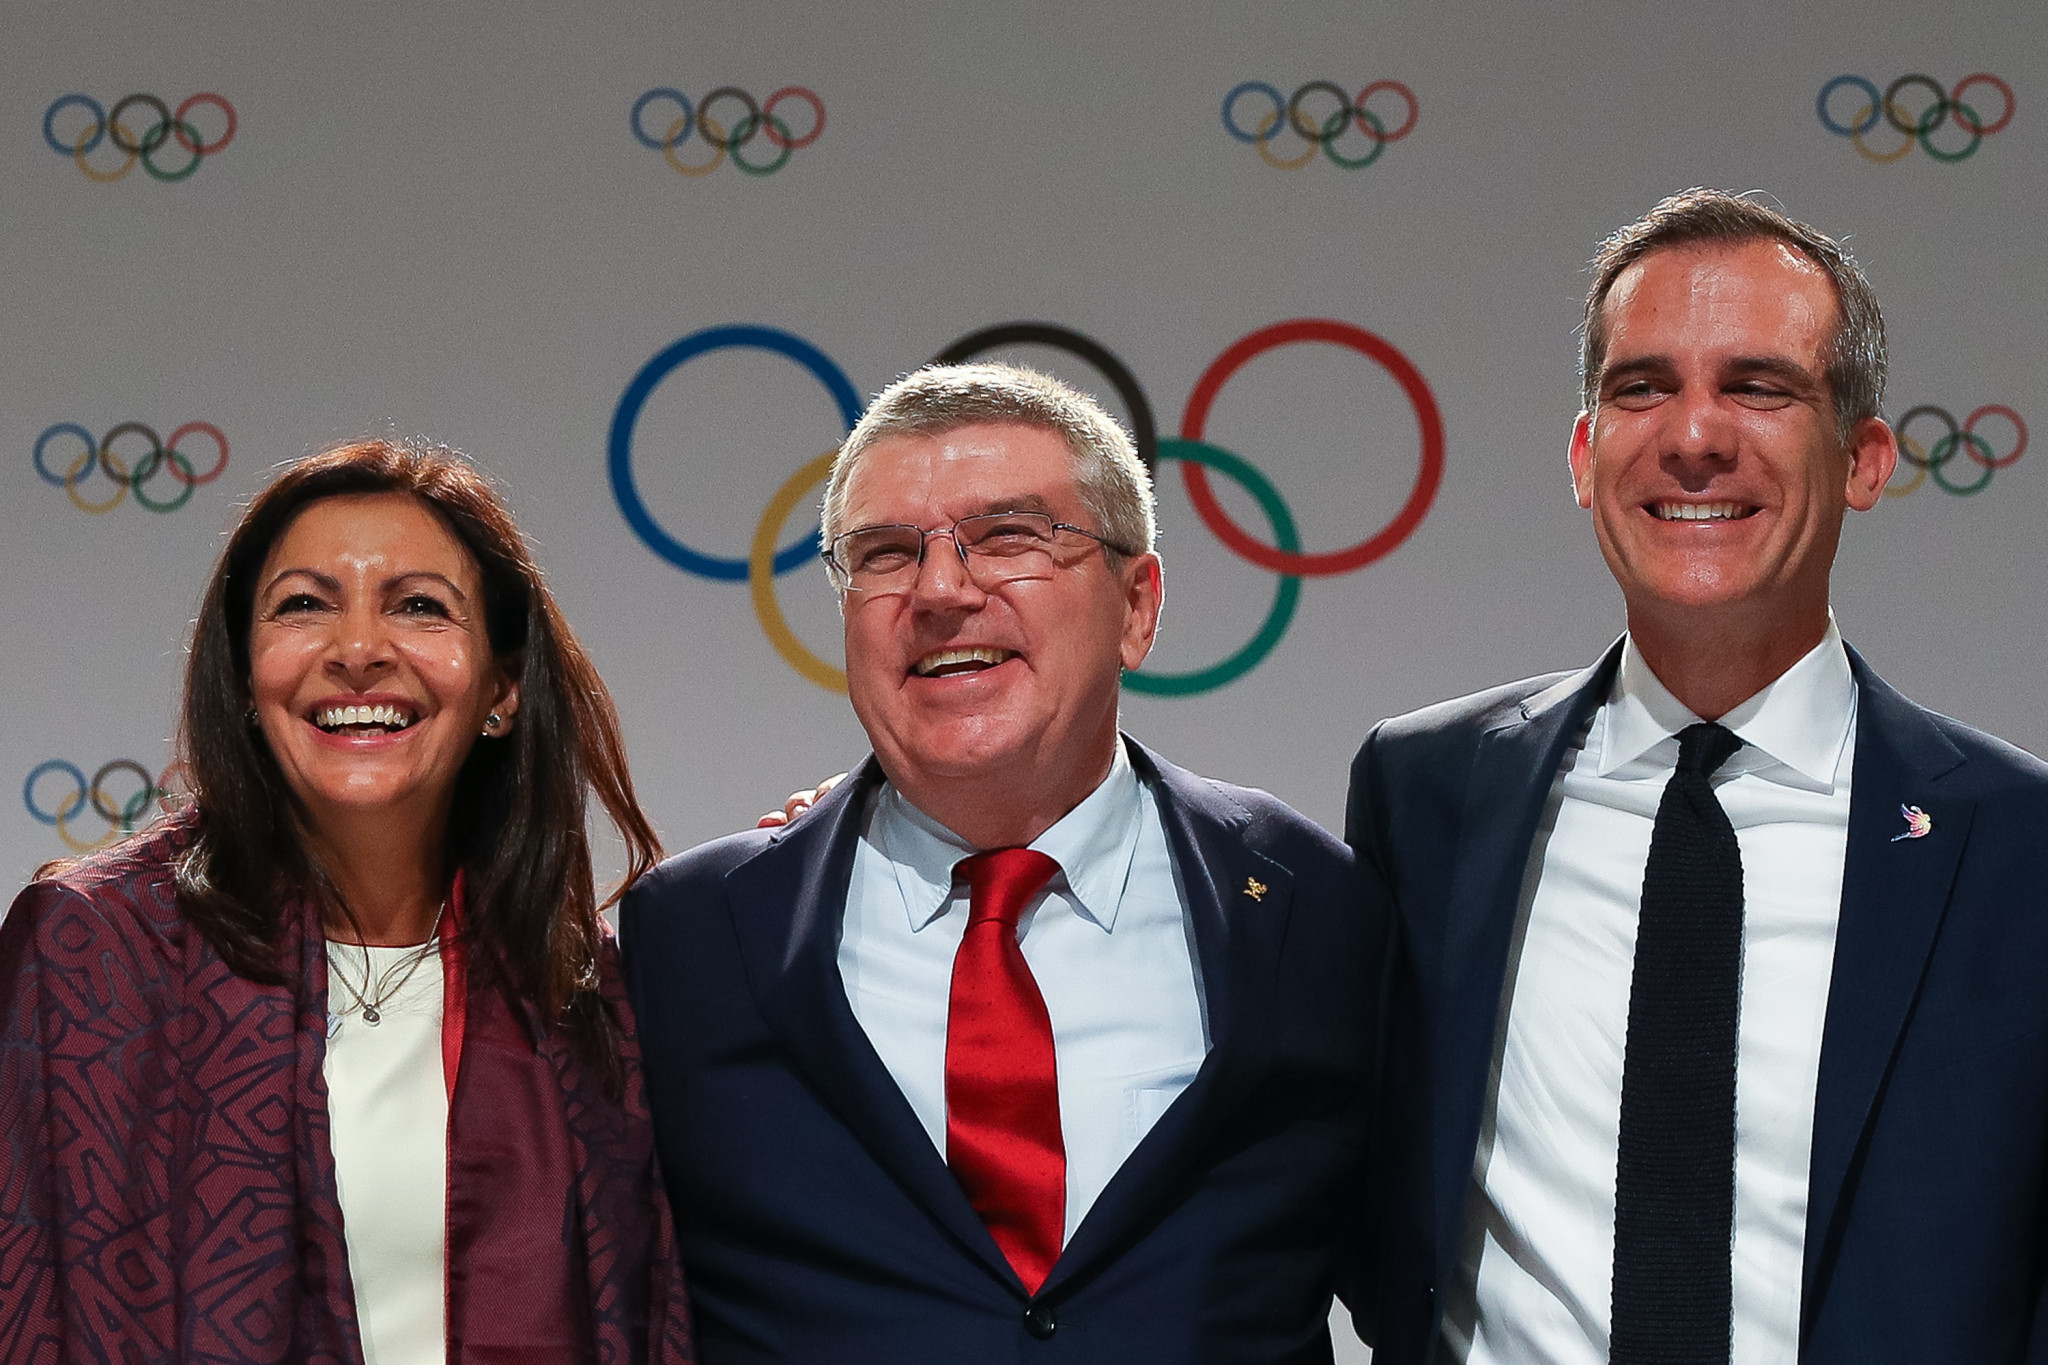 The two Mayors were central to their city's Olympic bids ©Getty Images